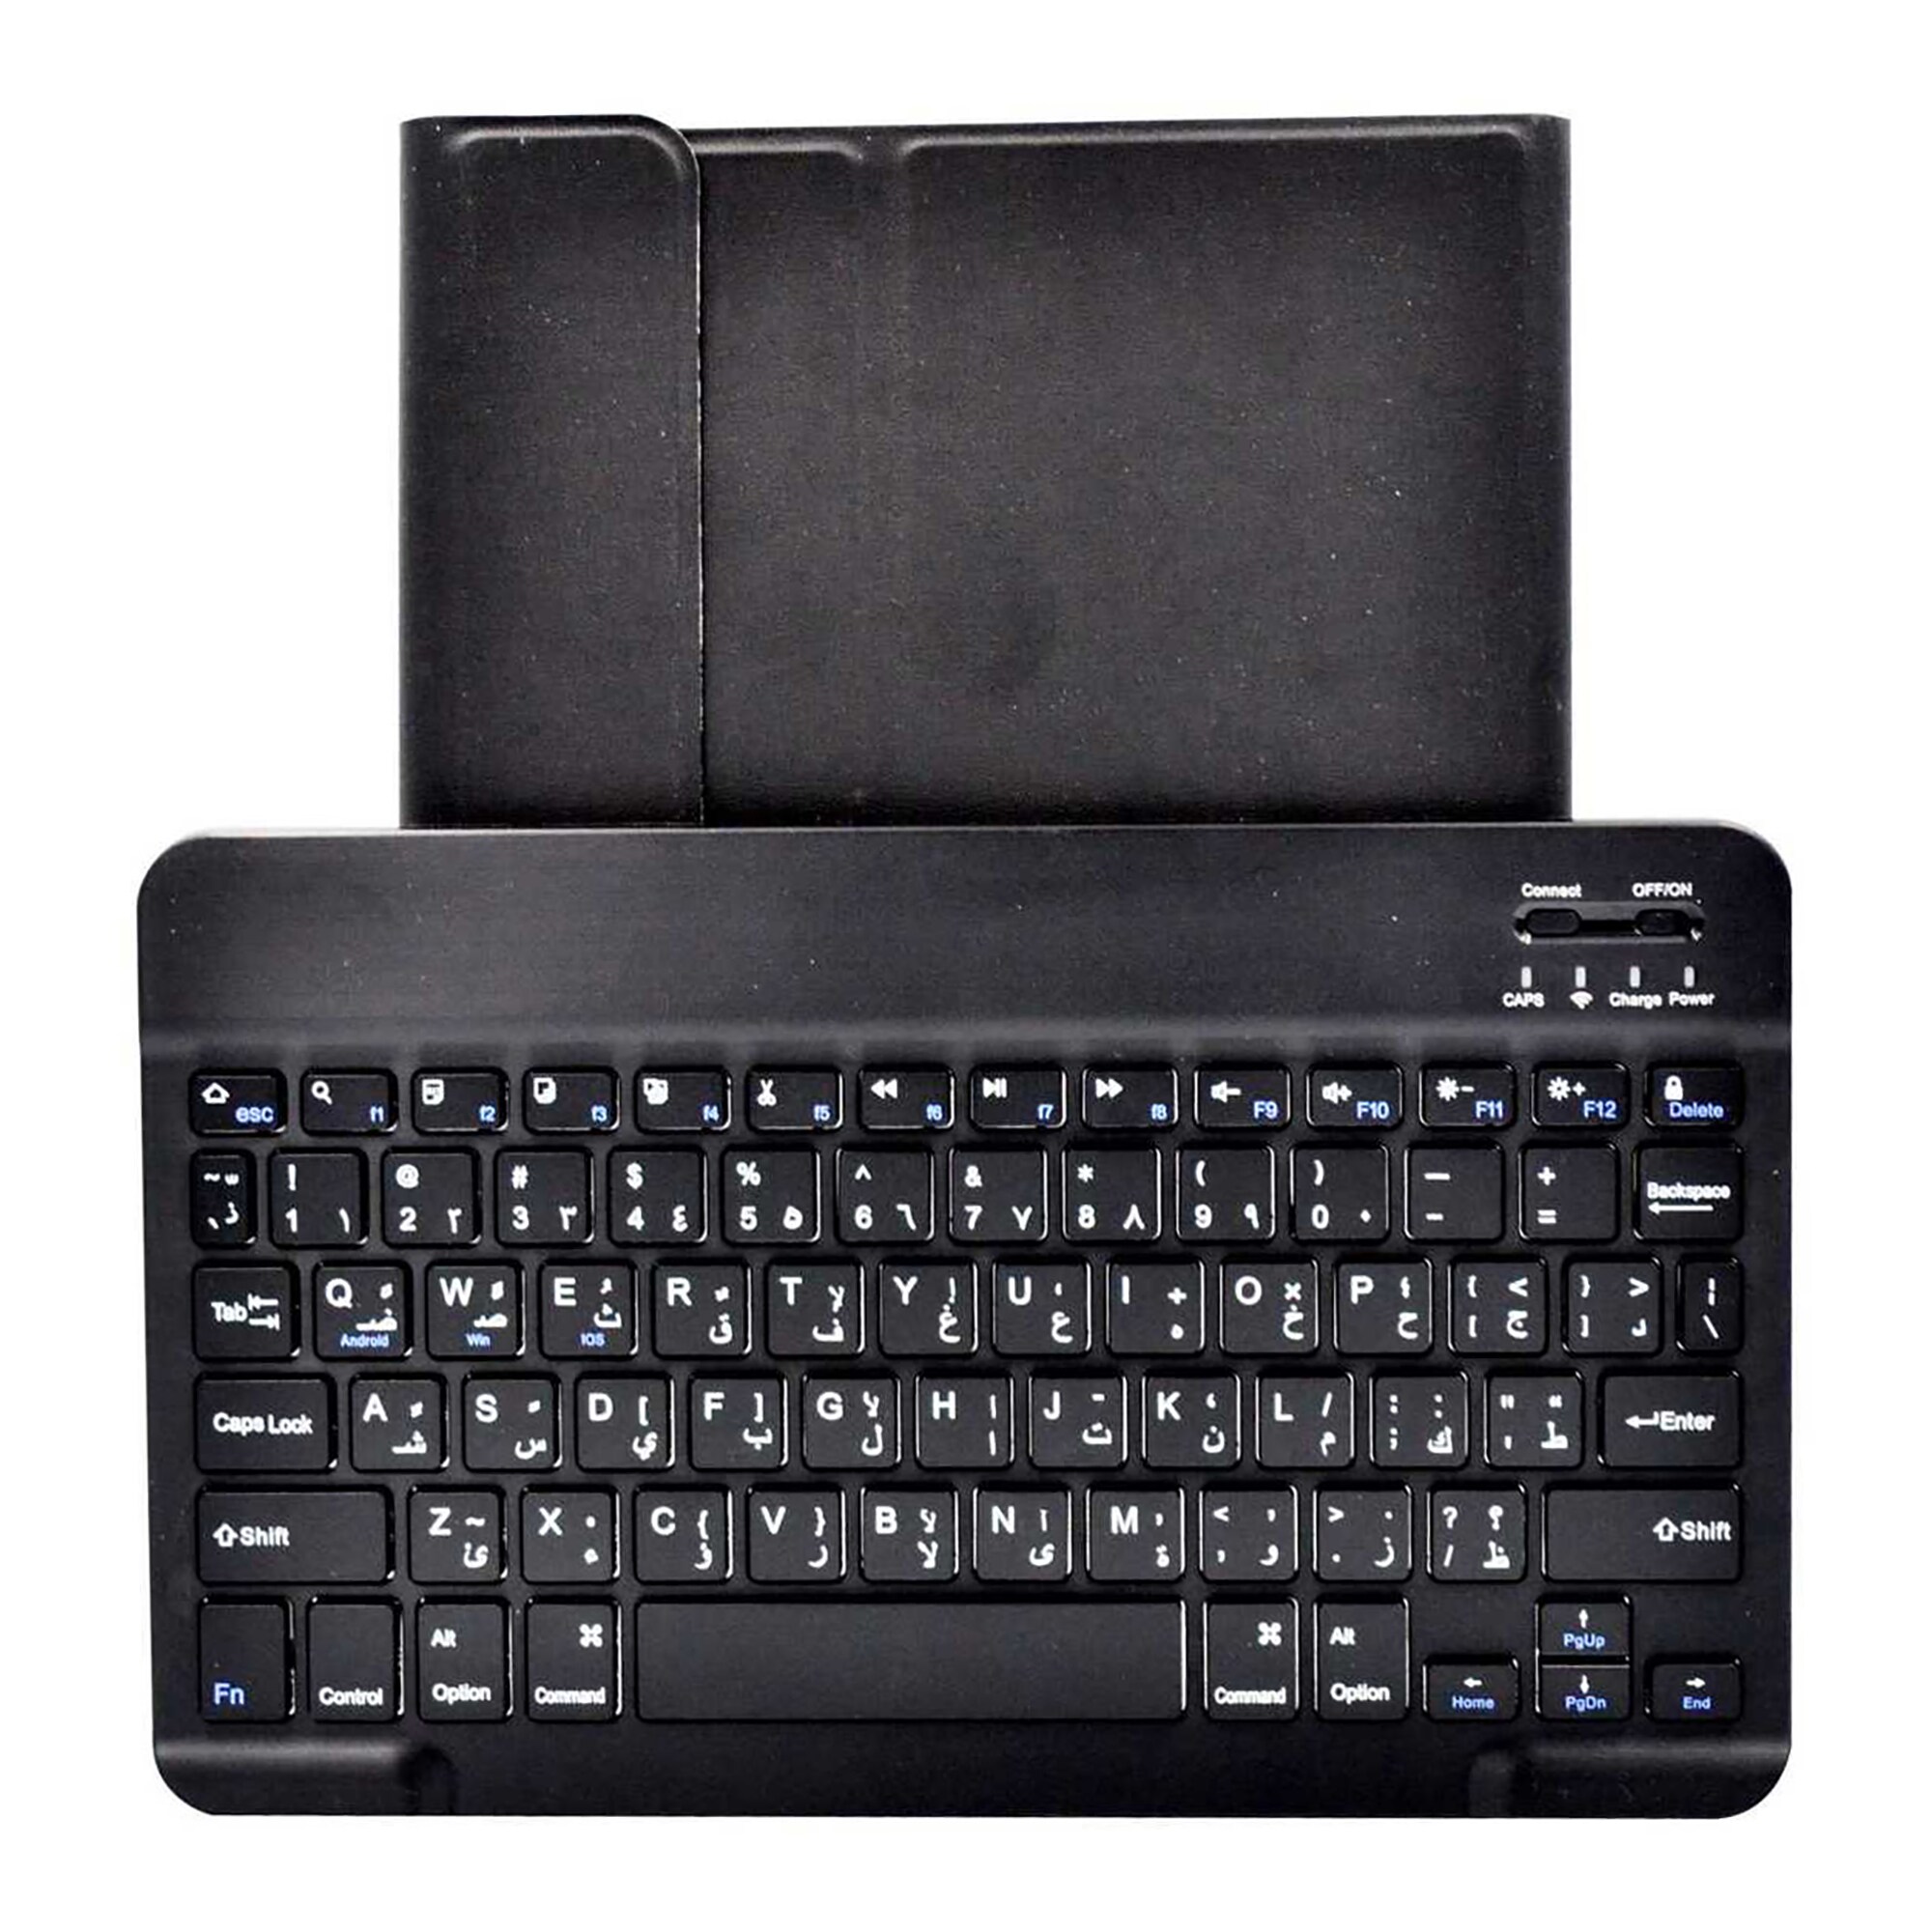 HiPhone Leather Keyboard Case for Galaxy Tab S6 Lite